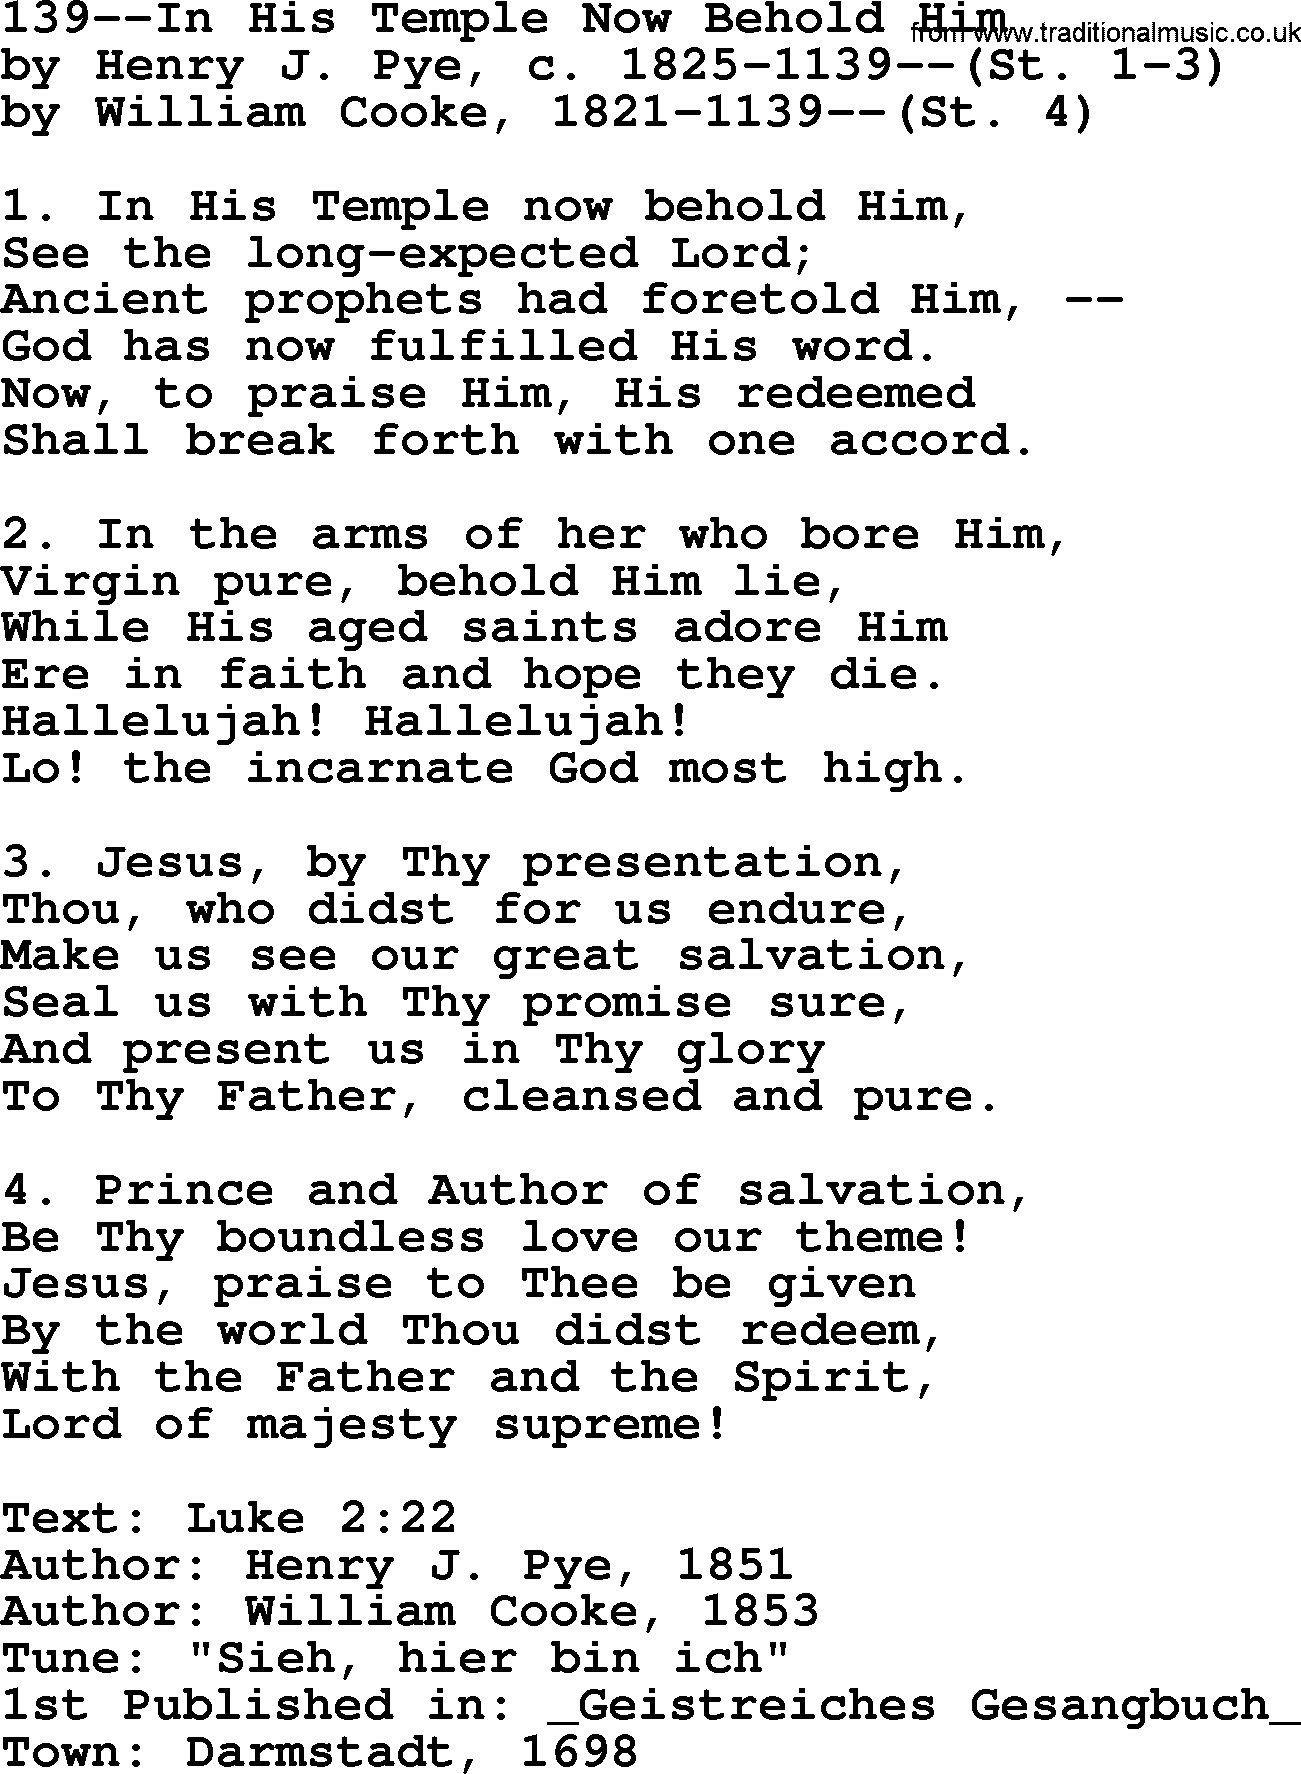 Lutheran Hymn: 139--In His Temple Now Behold Him.txt lyrics with PDF